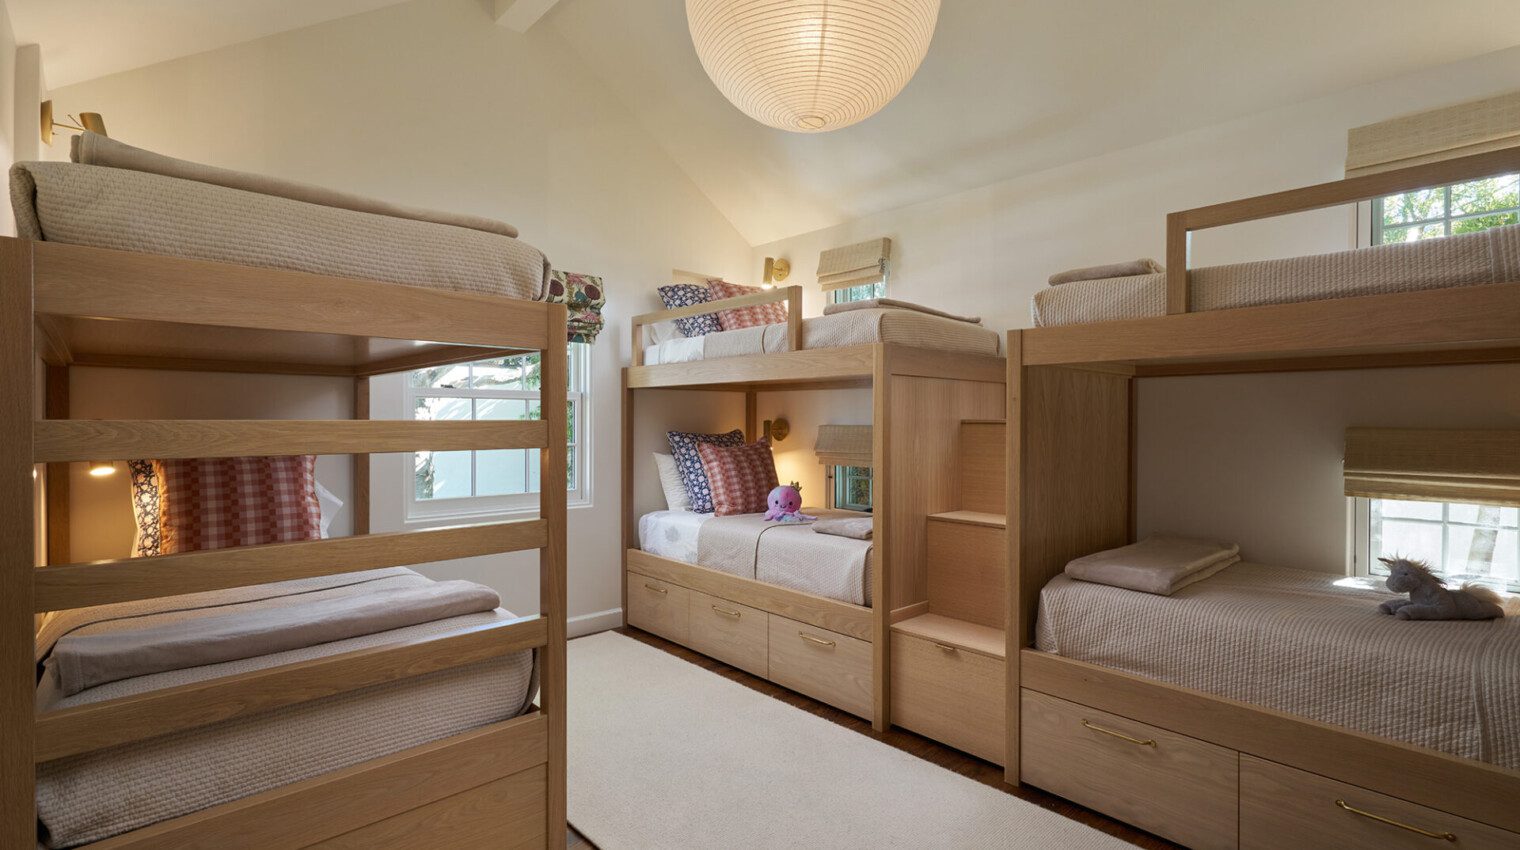 Showcasing the interior design kids room with three bunkbeds